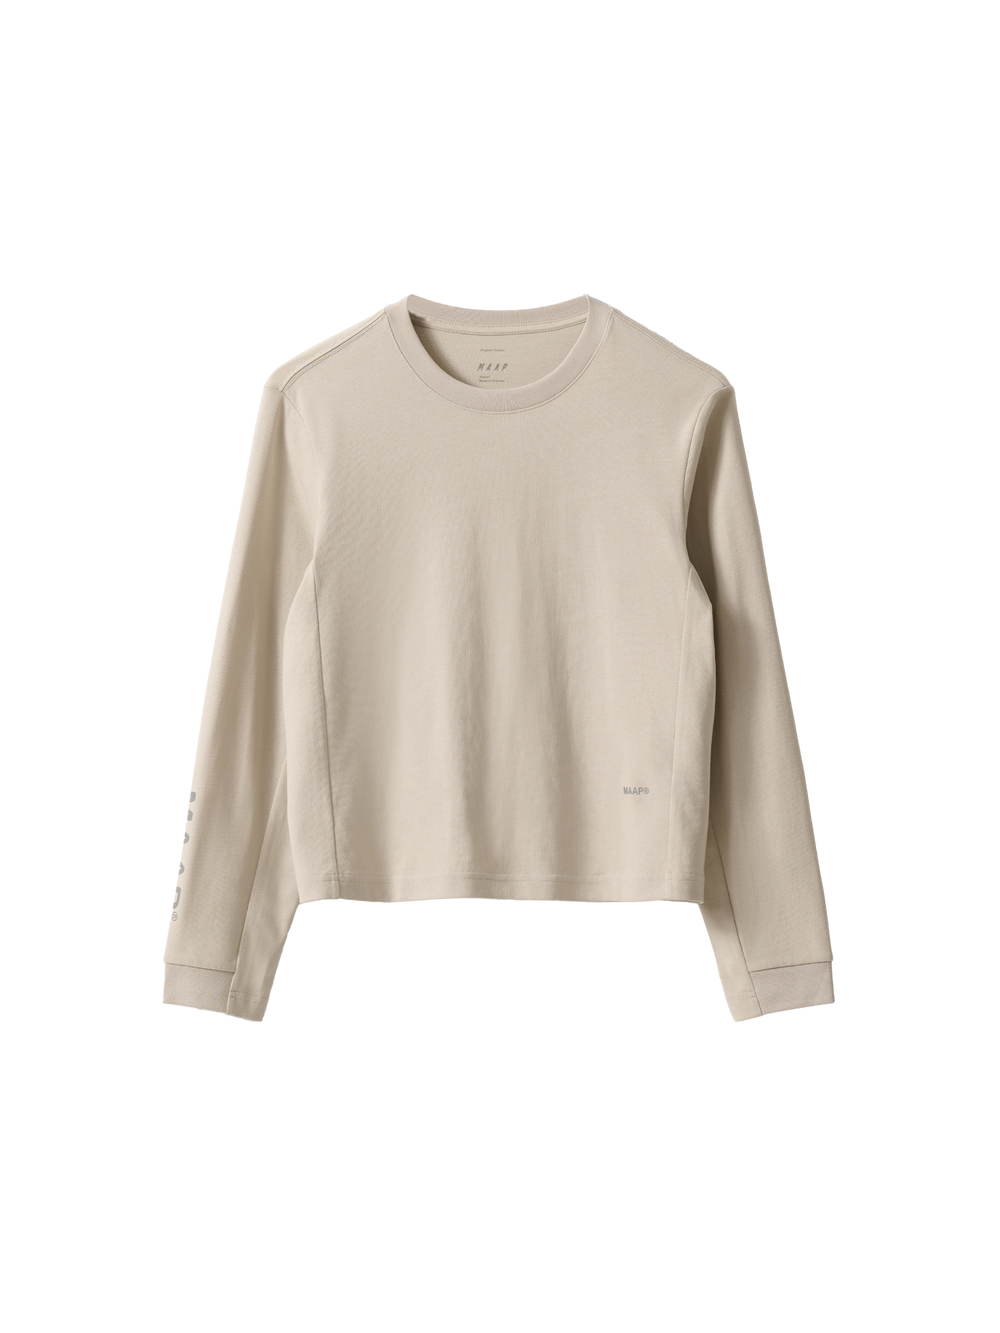 Product Image for Women's Essentials LS Tee